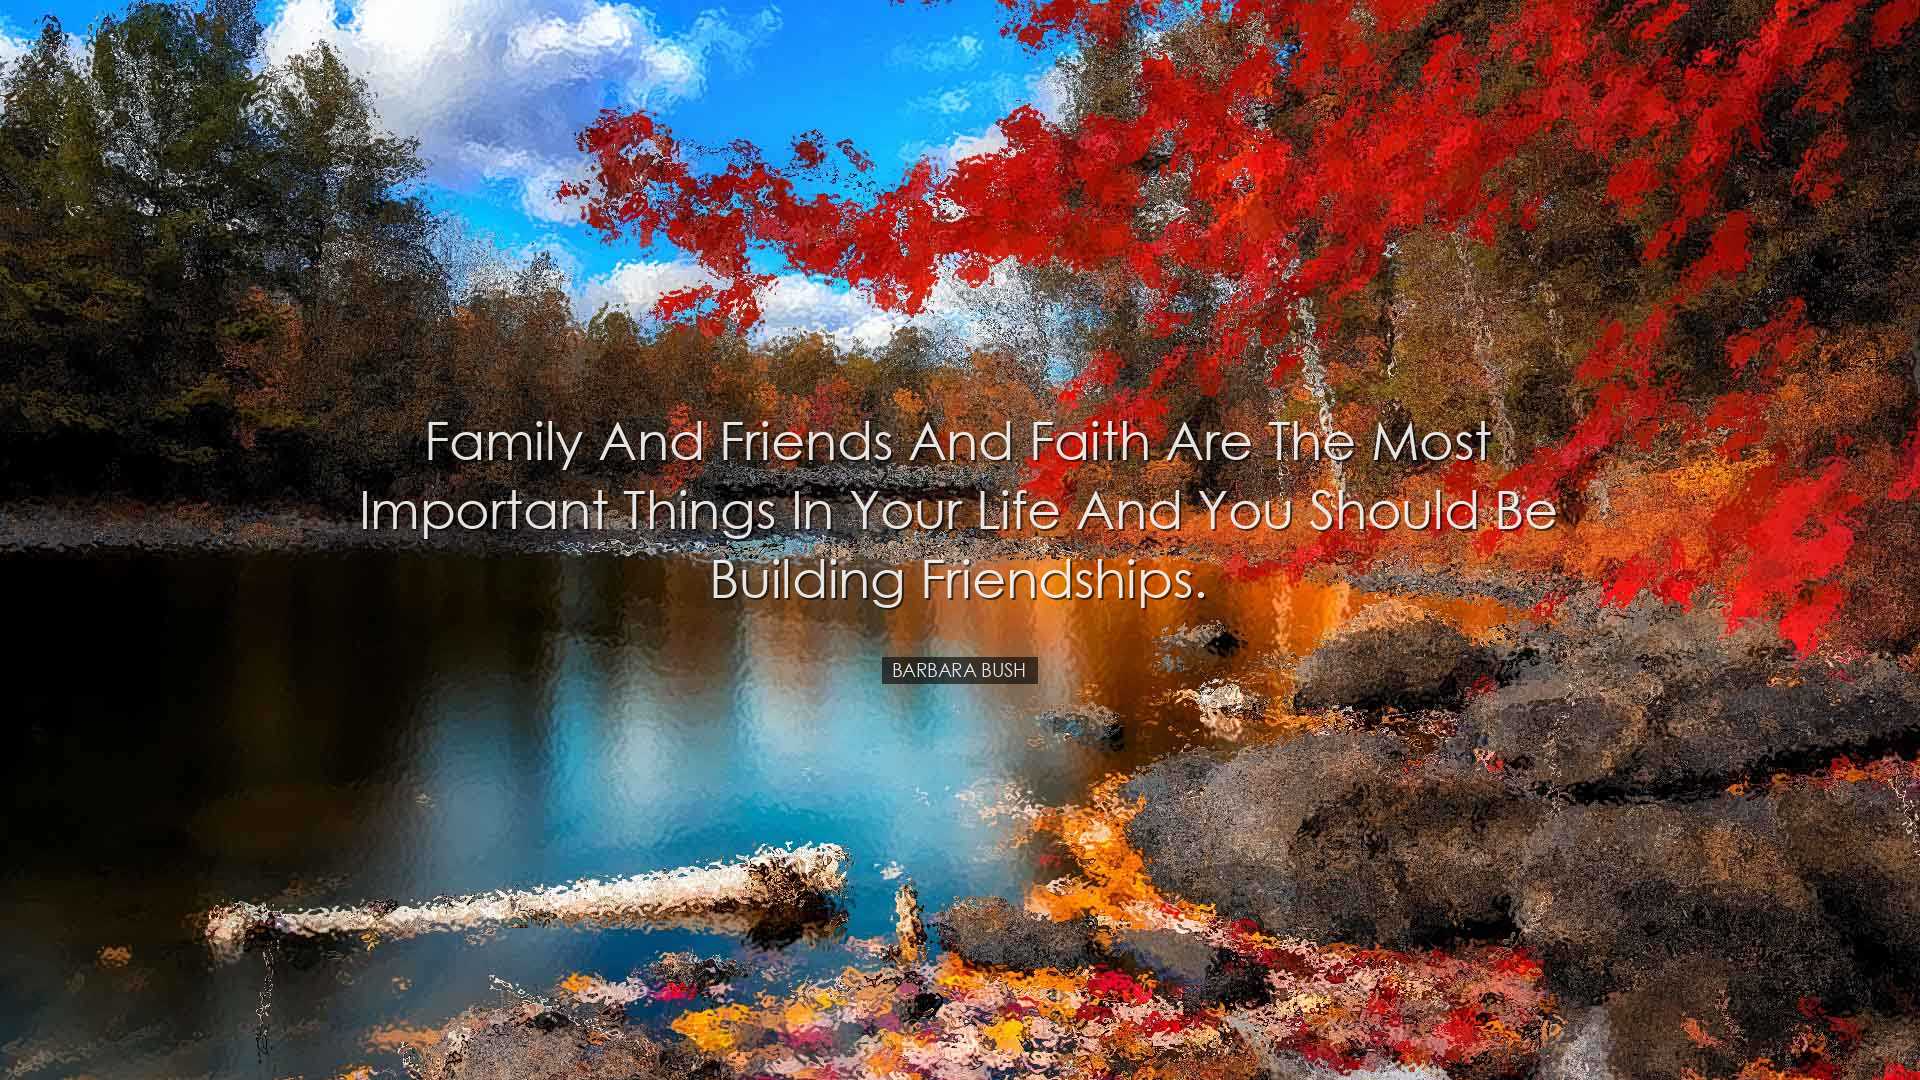 Family and friends and faith are the most important things in your